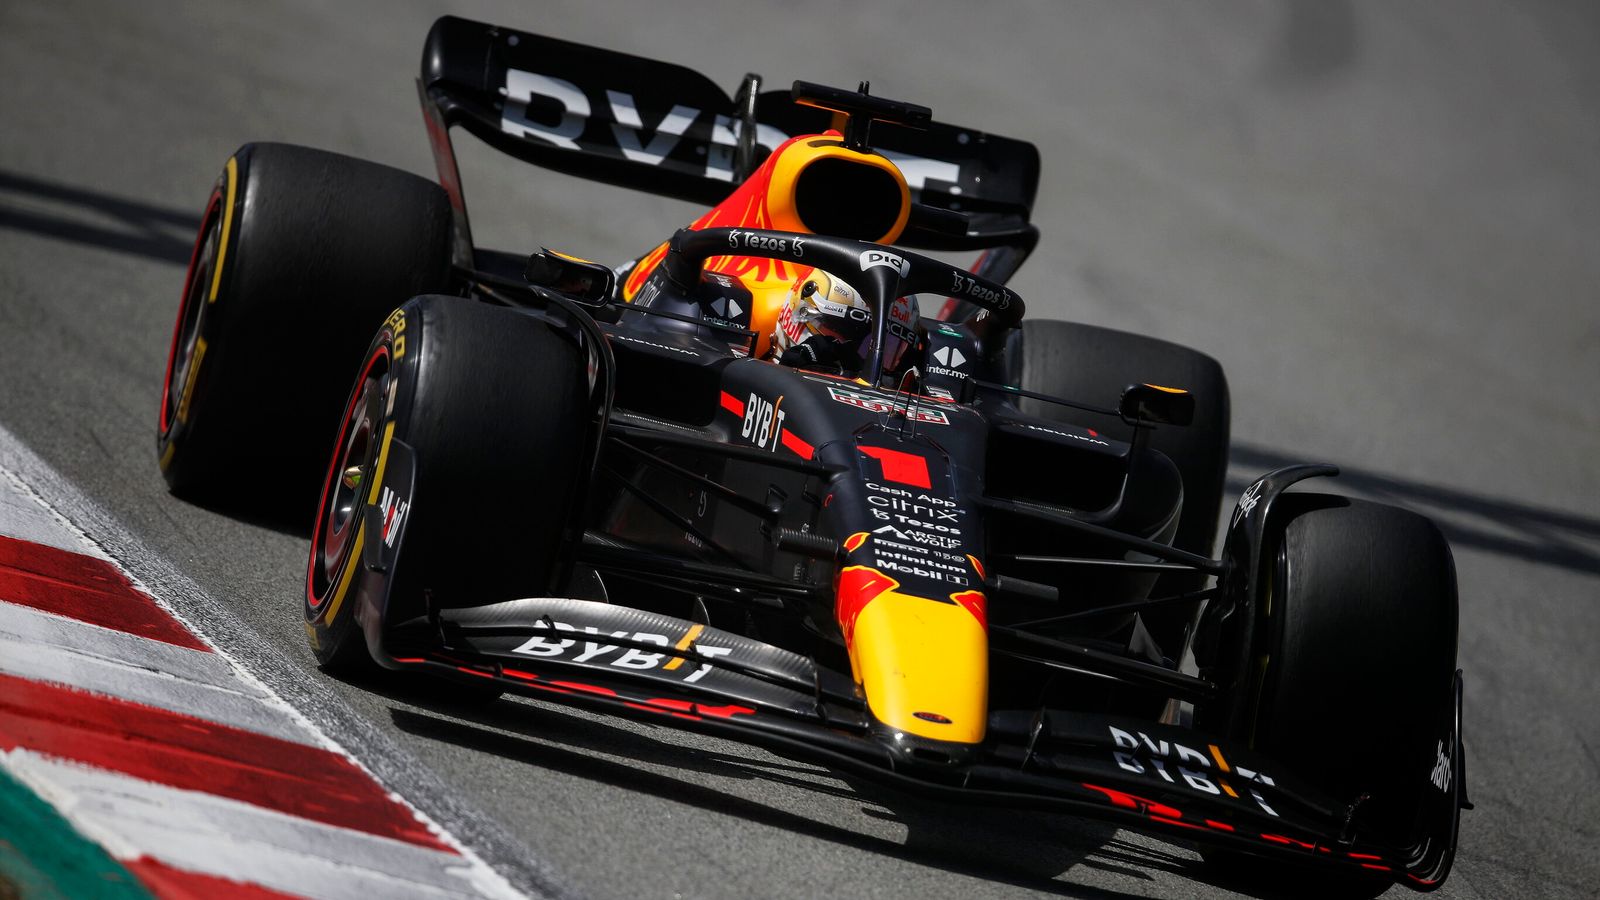 Spanish GP: Max Verstappen wins thrilling race after Charles Leclerc engine failure, Lewis Hamilton recovers after first-lap collision